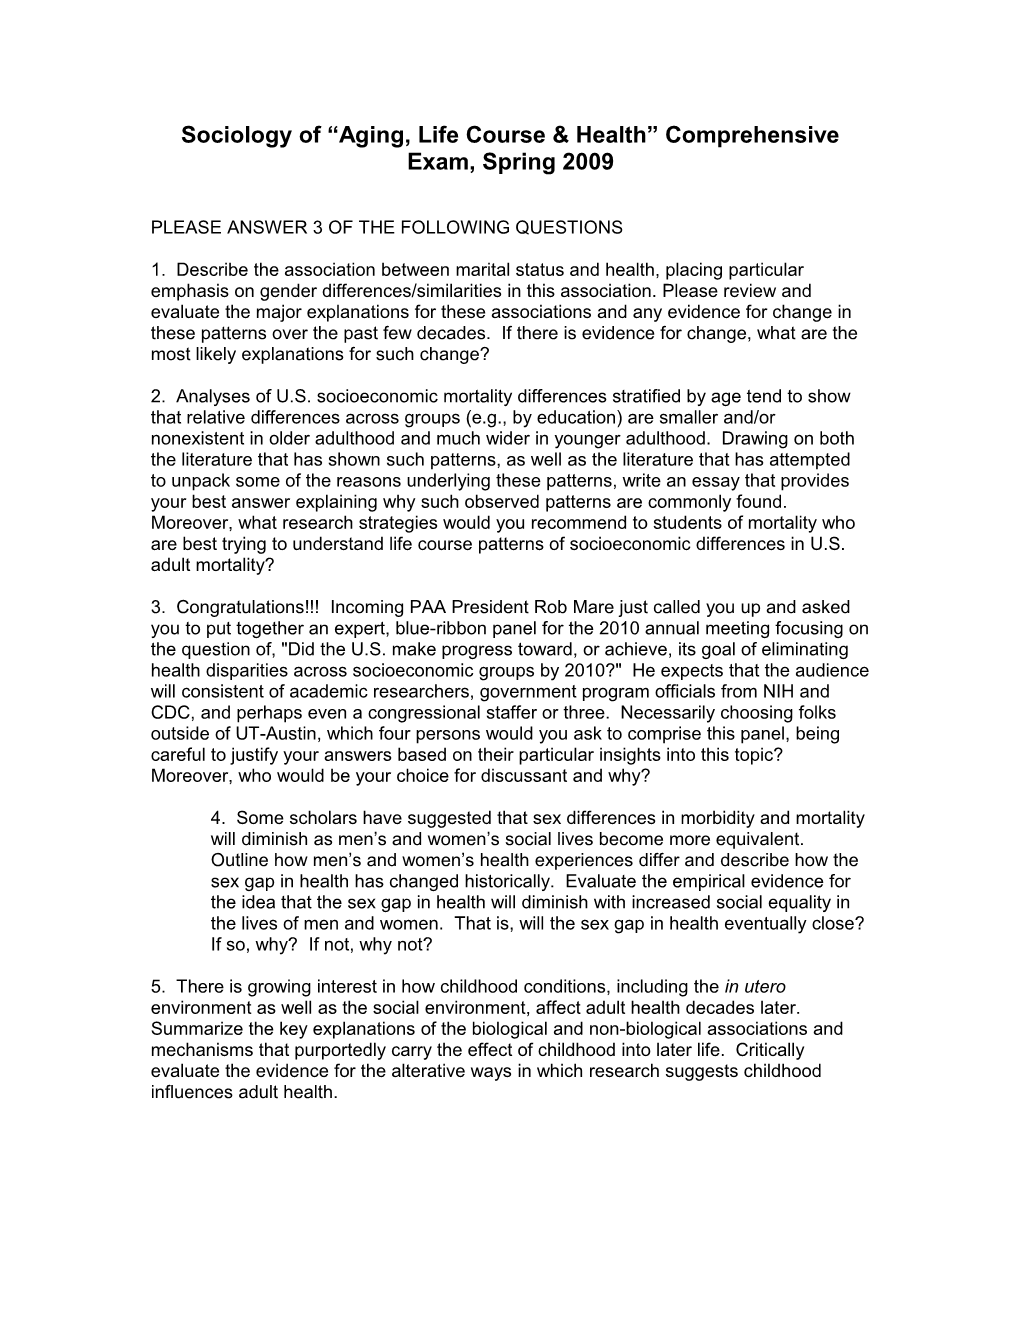 Sociology of Aging, Life Course & Health Comprehensive Exam, Spring 2009